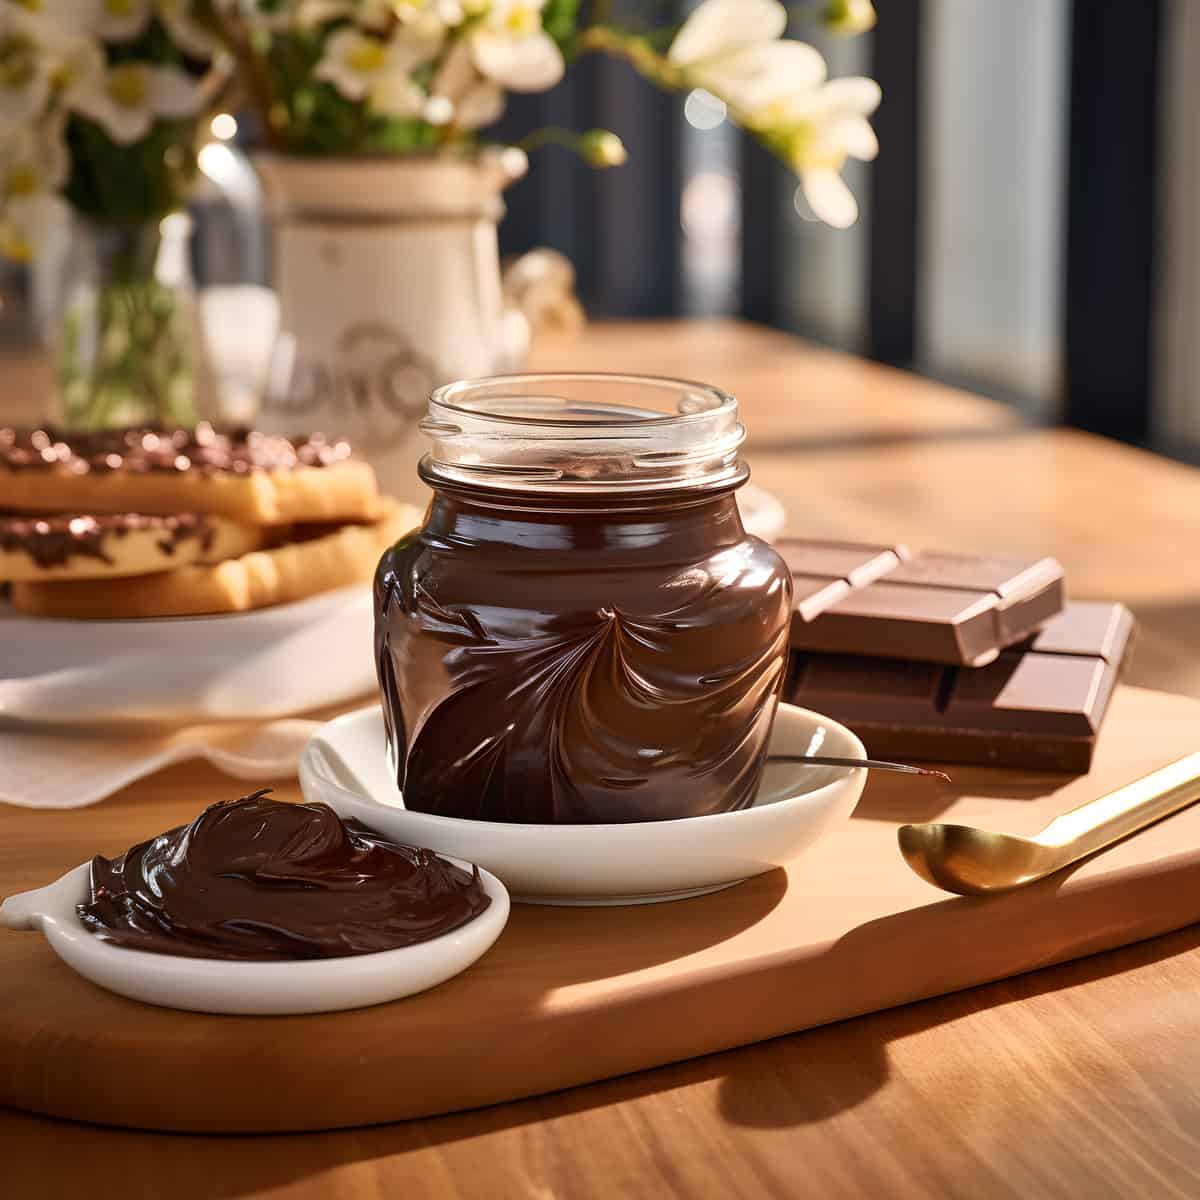 Chocolate Spread on a kitchen counter